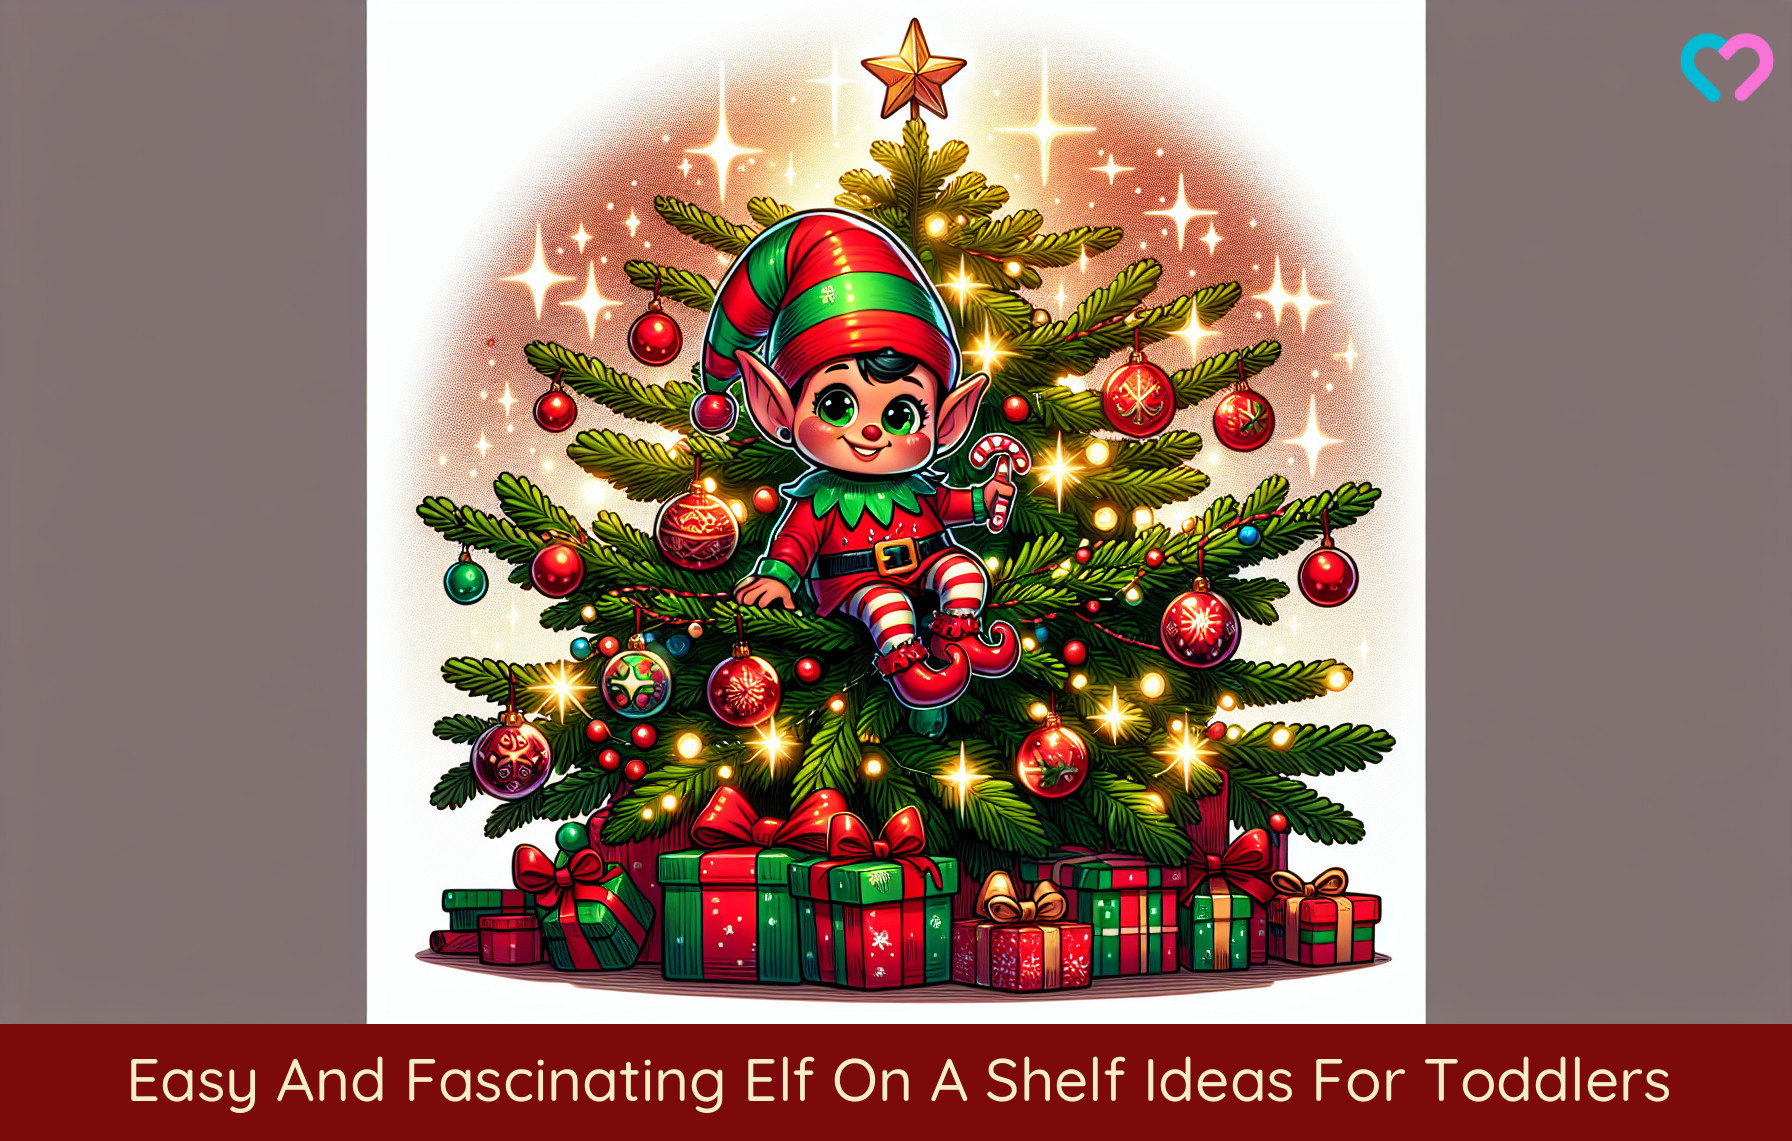 Elf On A Shelf Ideas For Toddlers_illustration